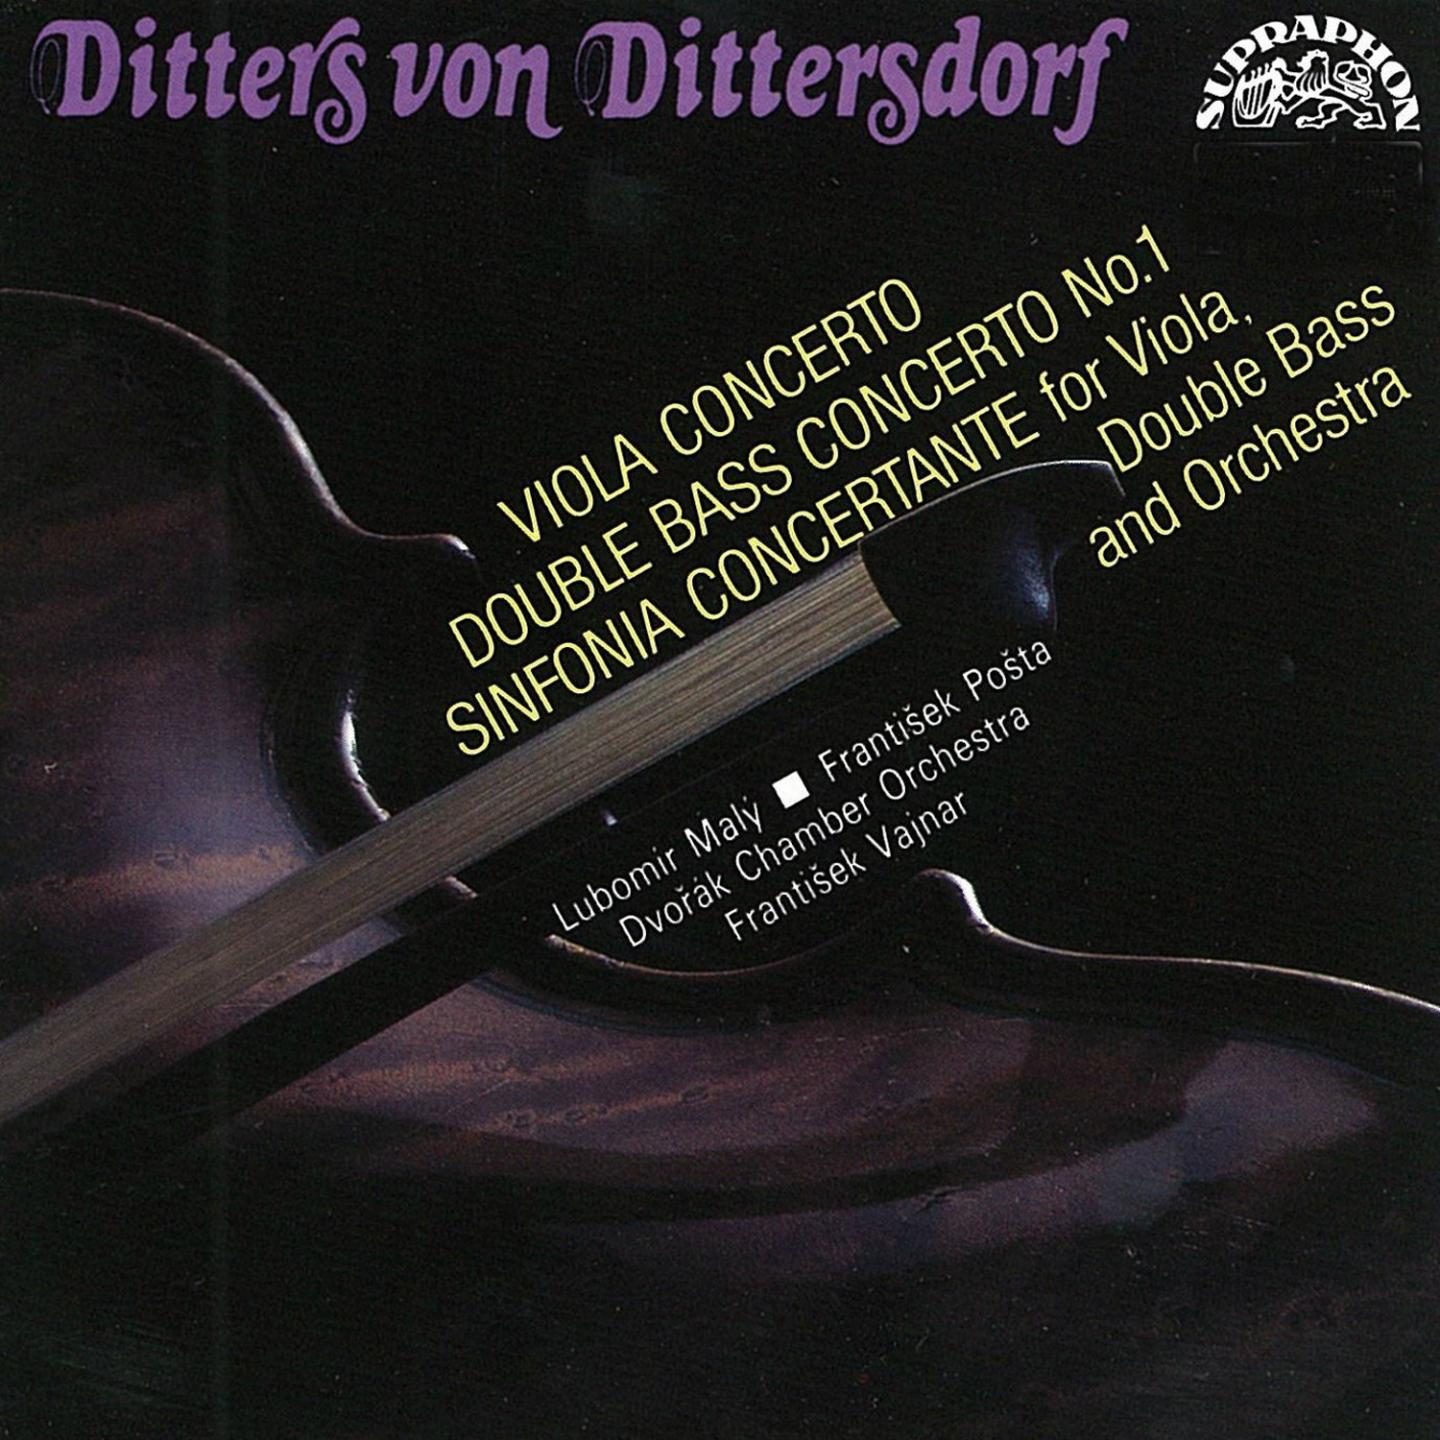 Sinfonia Concertante for Viola, Double Bass and Orchestra: I. Allegro